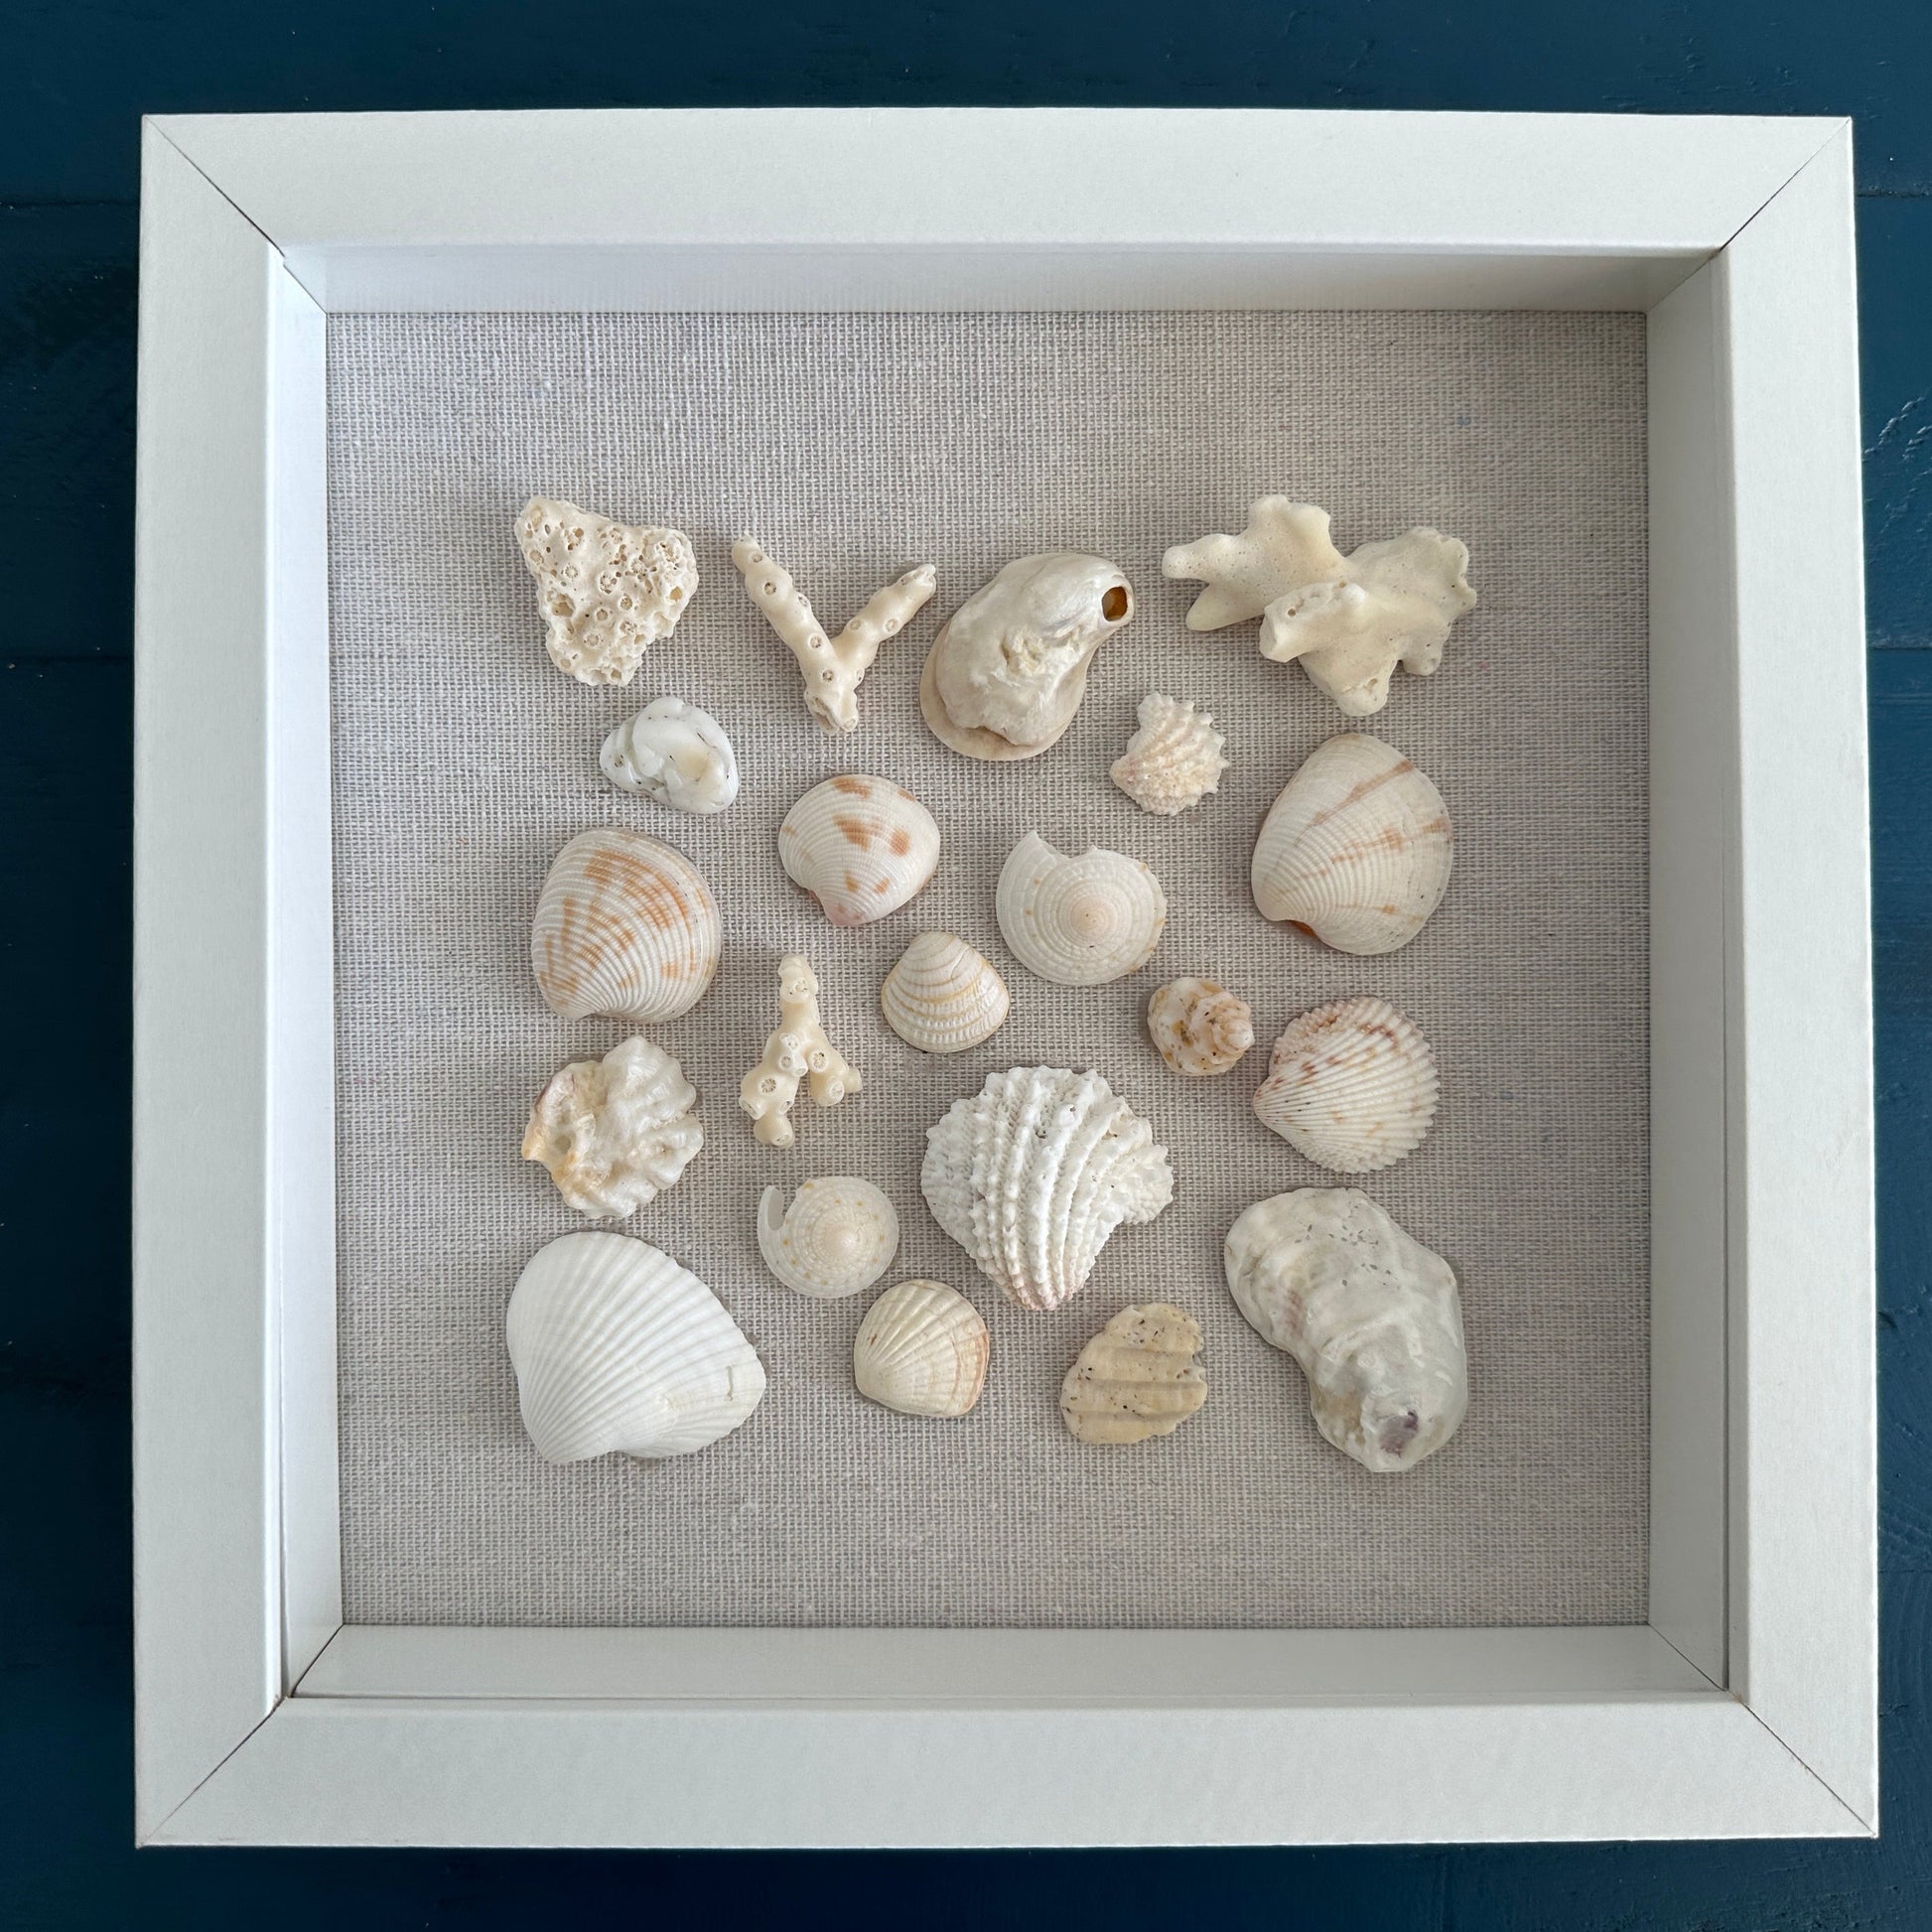 8x8 seashell wall art shadow box white on linen front view by jacquelin mb designs 